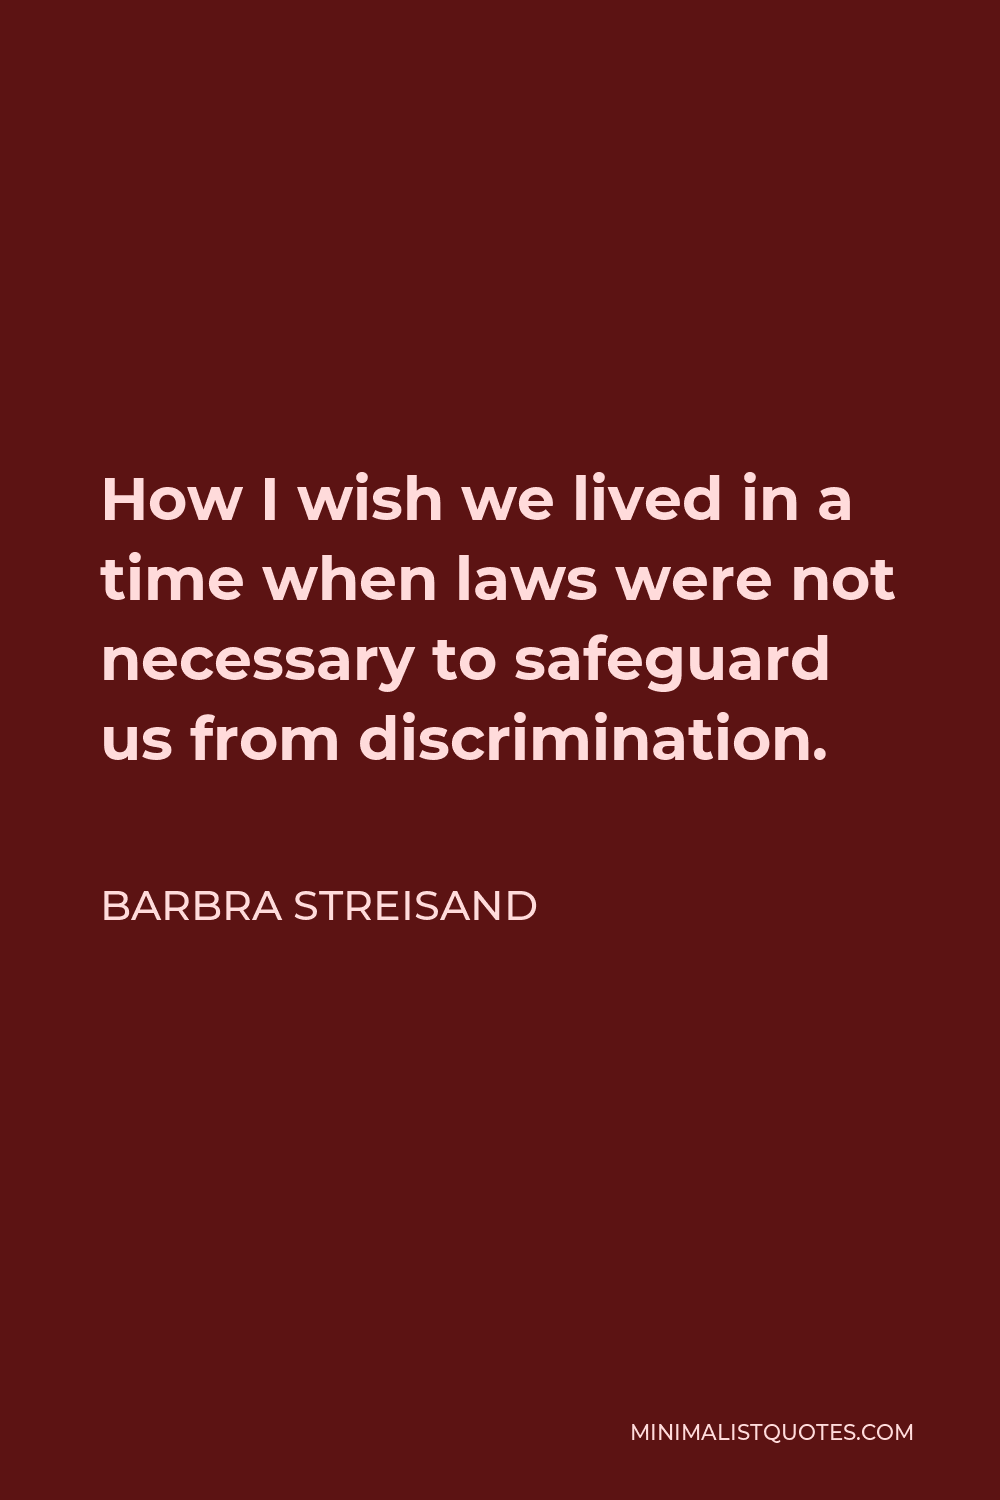 Barbra Streisand Quote - How I wish we lived in a time when laws were not necessary to safeguard us from discrimination.